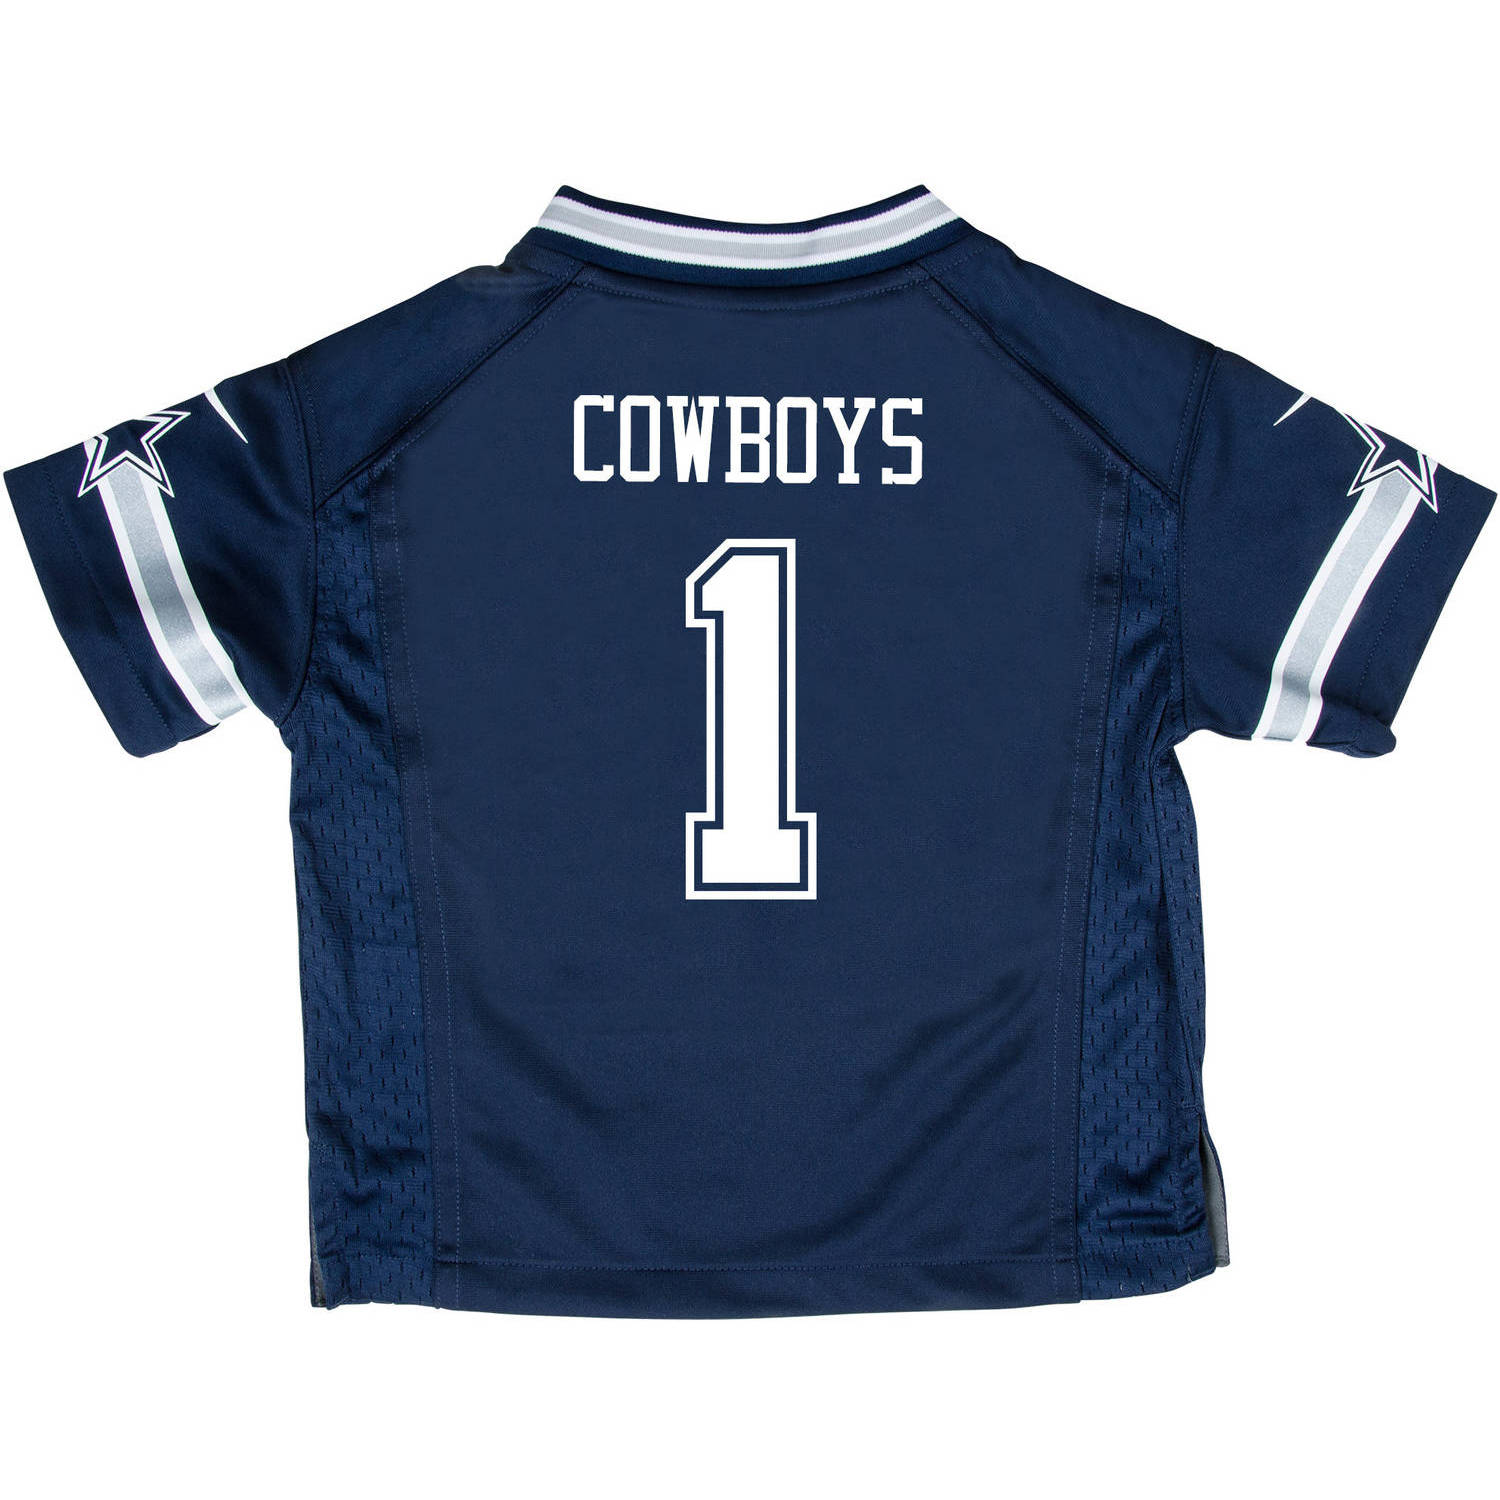 NFL Dallas Cowboys Toddler Jersey - image 1 of 2